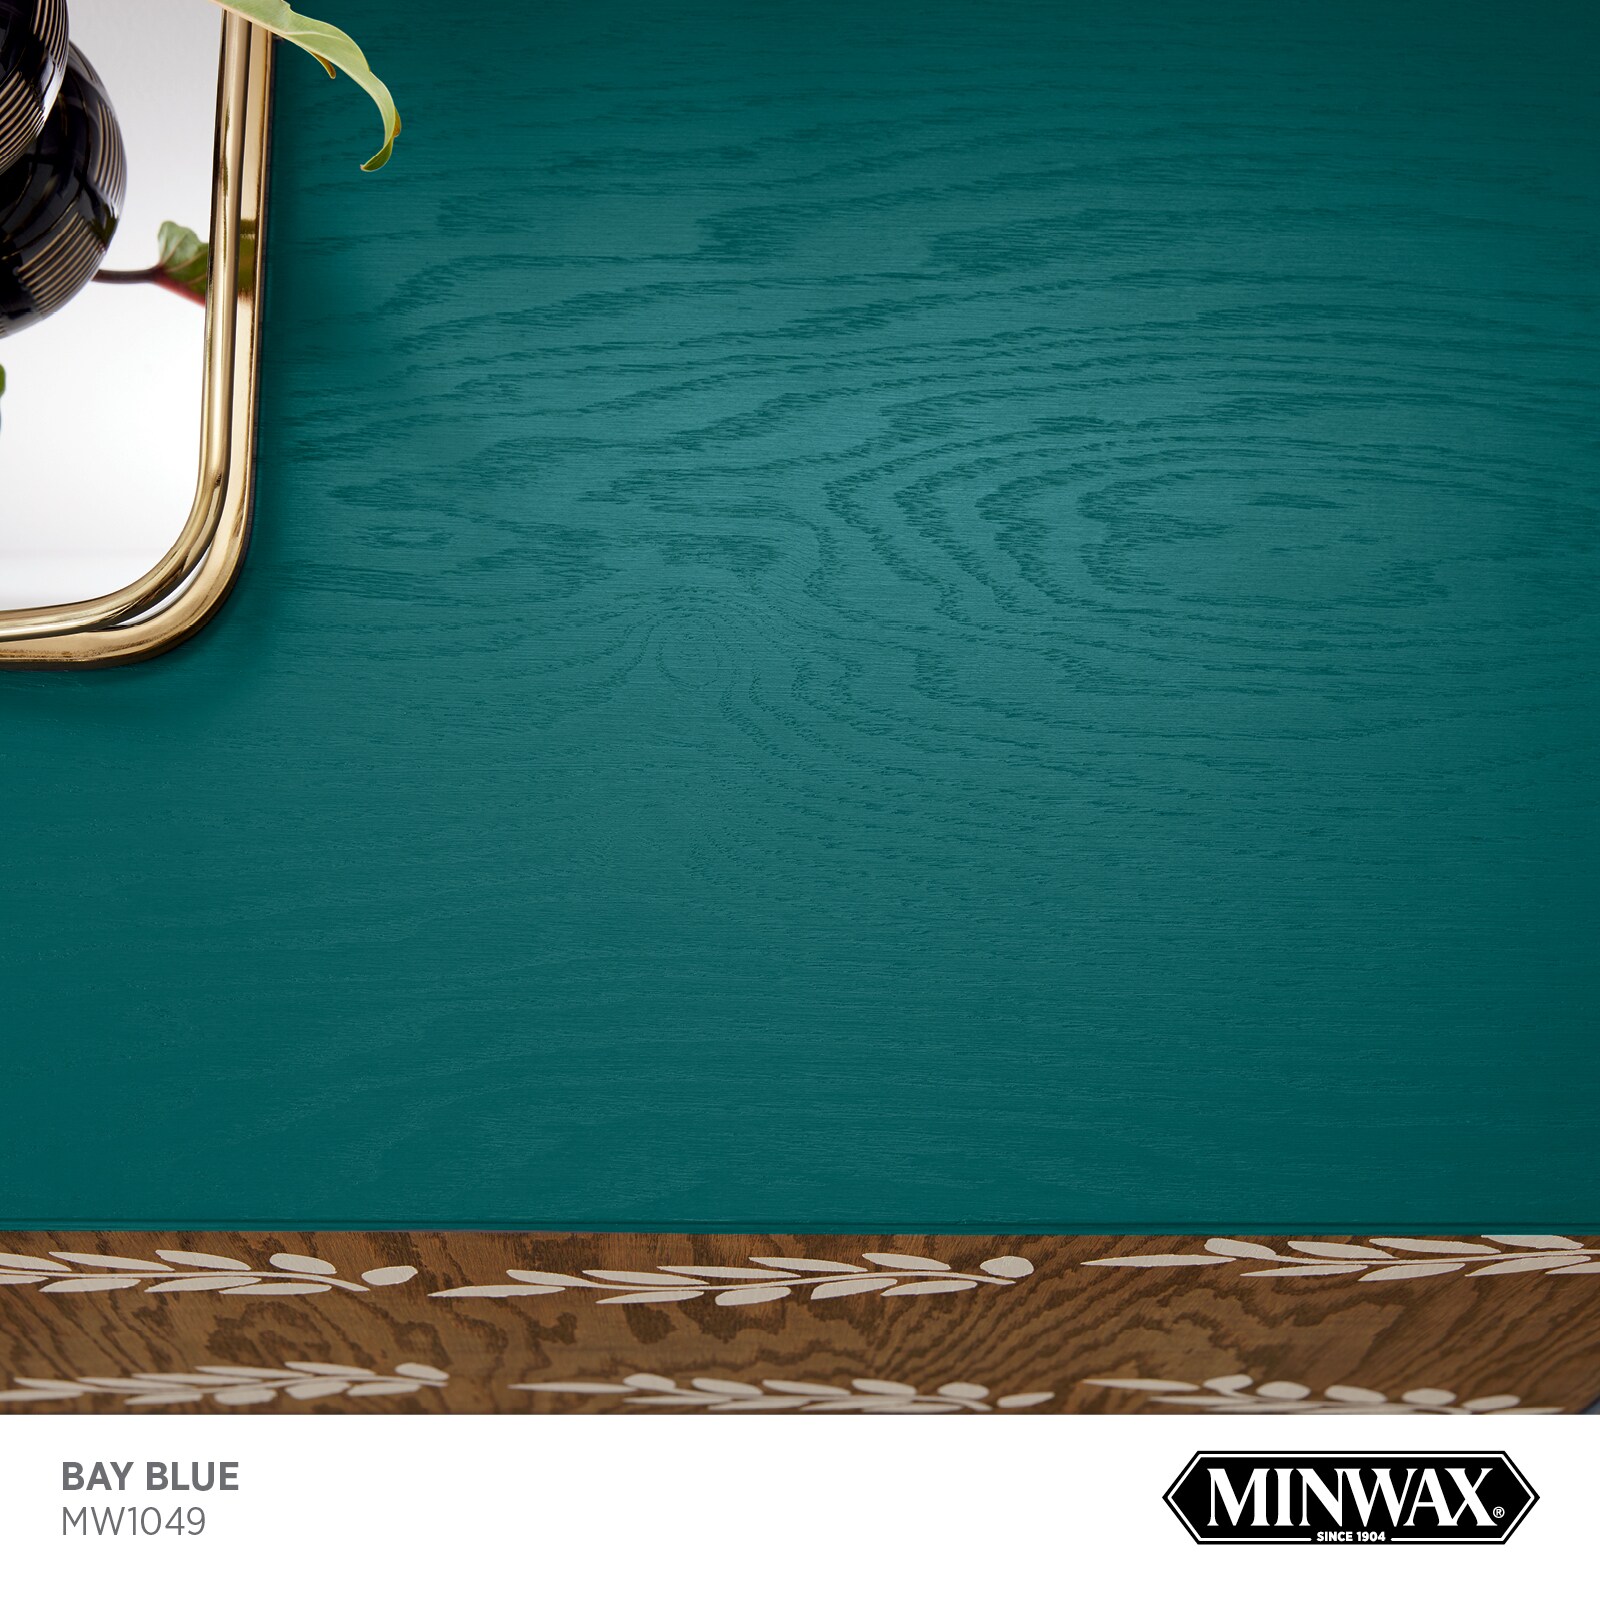 Minwax Announces 'Bay Blue' as 2024 Color of the Year